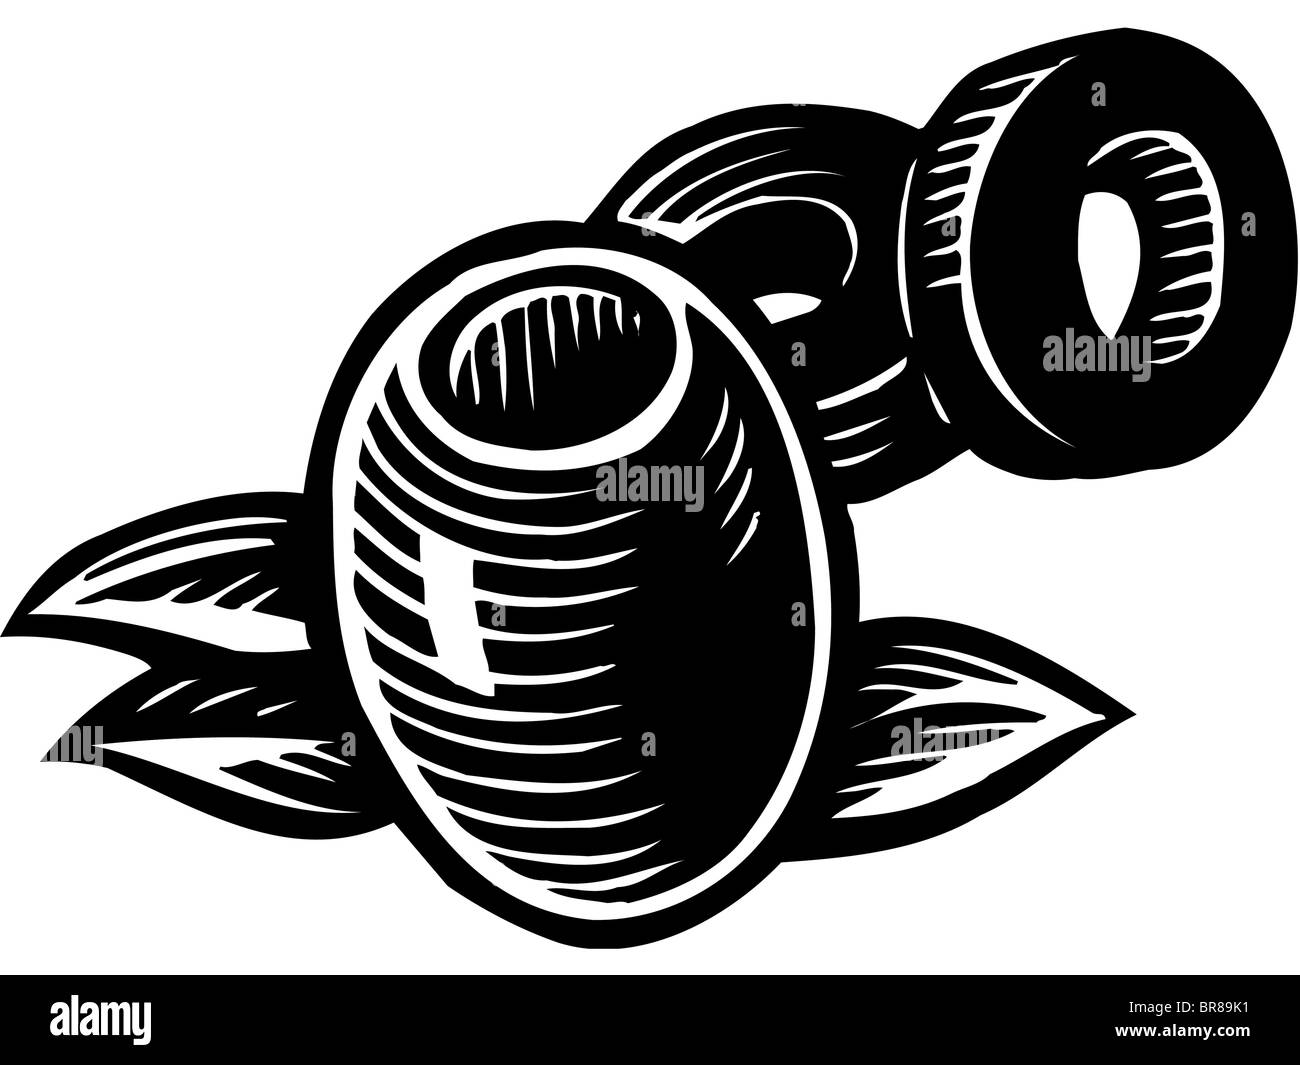 A black and white illustration of olives Stock Photo